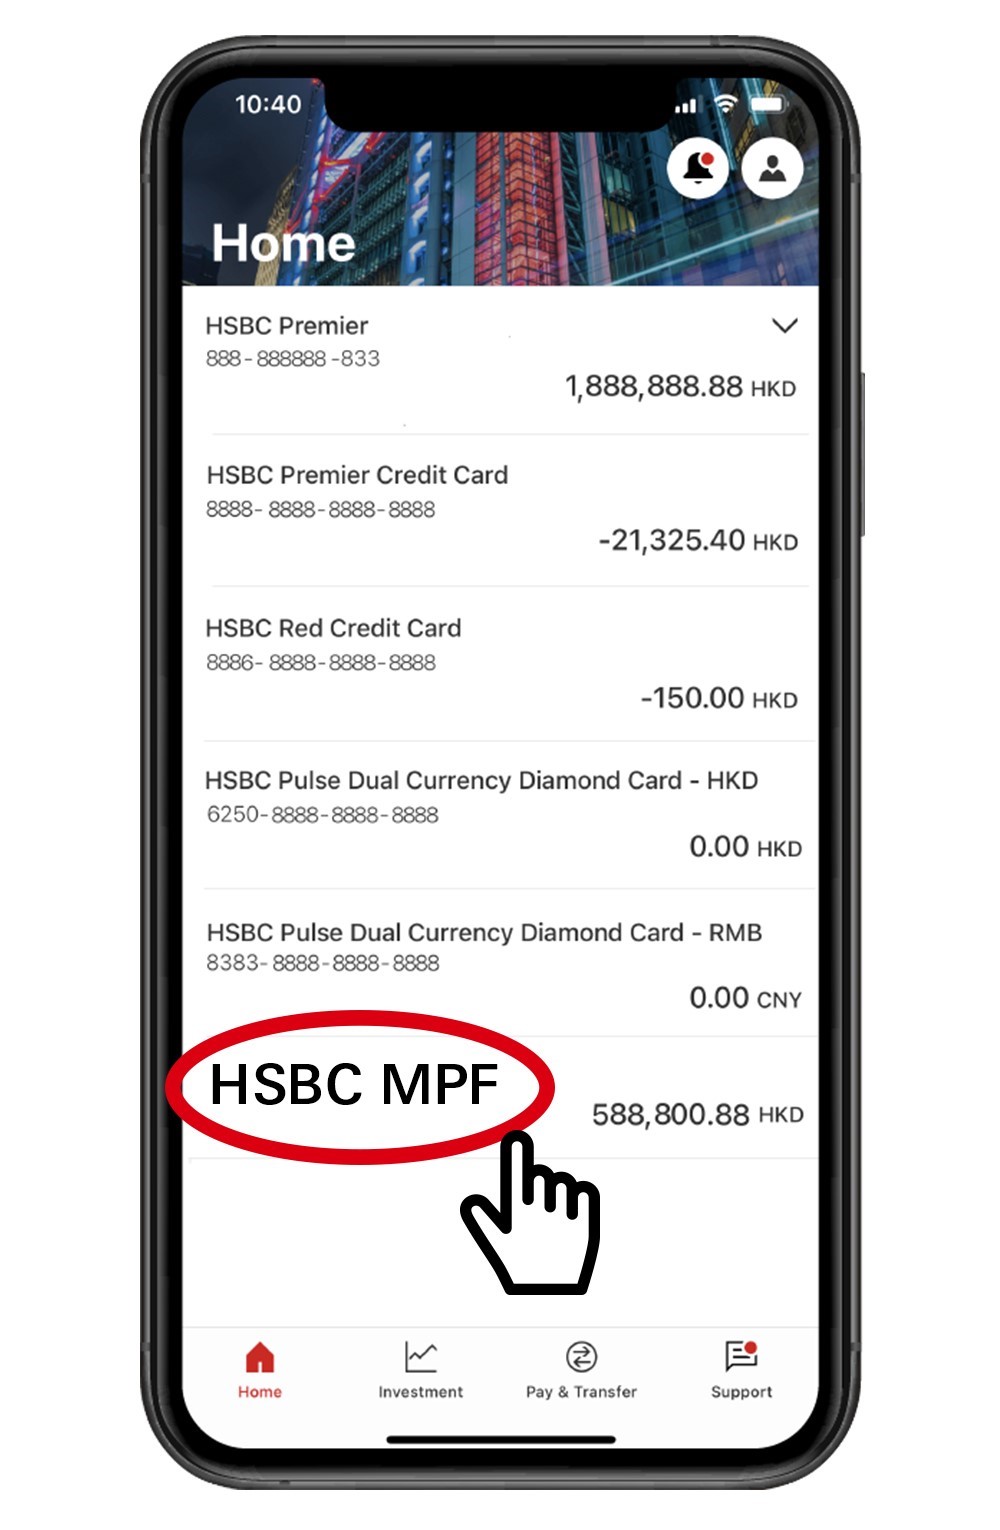 HSBC MPF is committed to digitising its services. As of December 2021, a daily average of more than 15,000 members checked their MPF accounts through the 